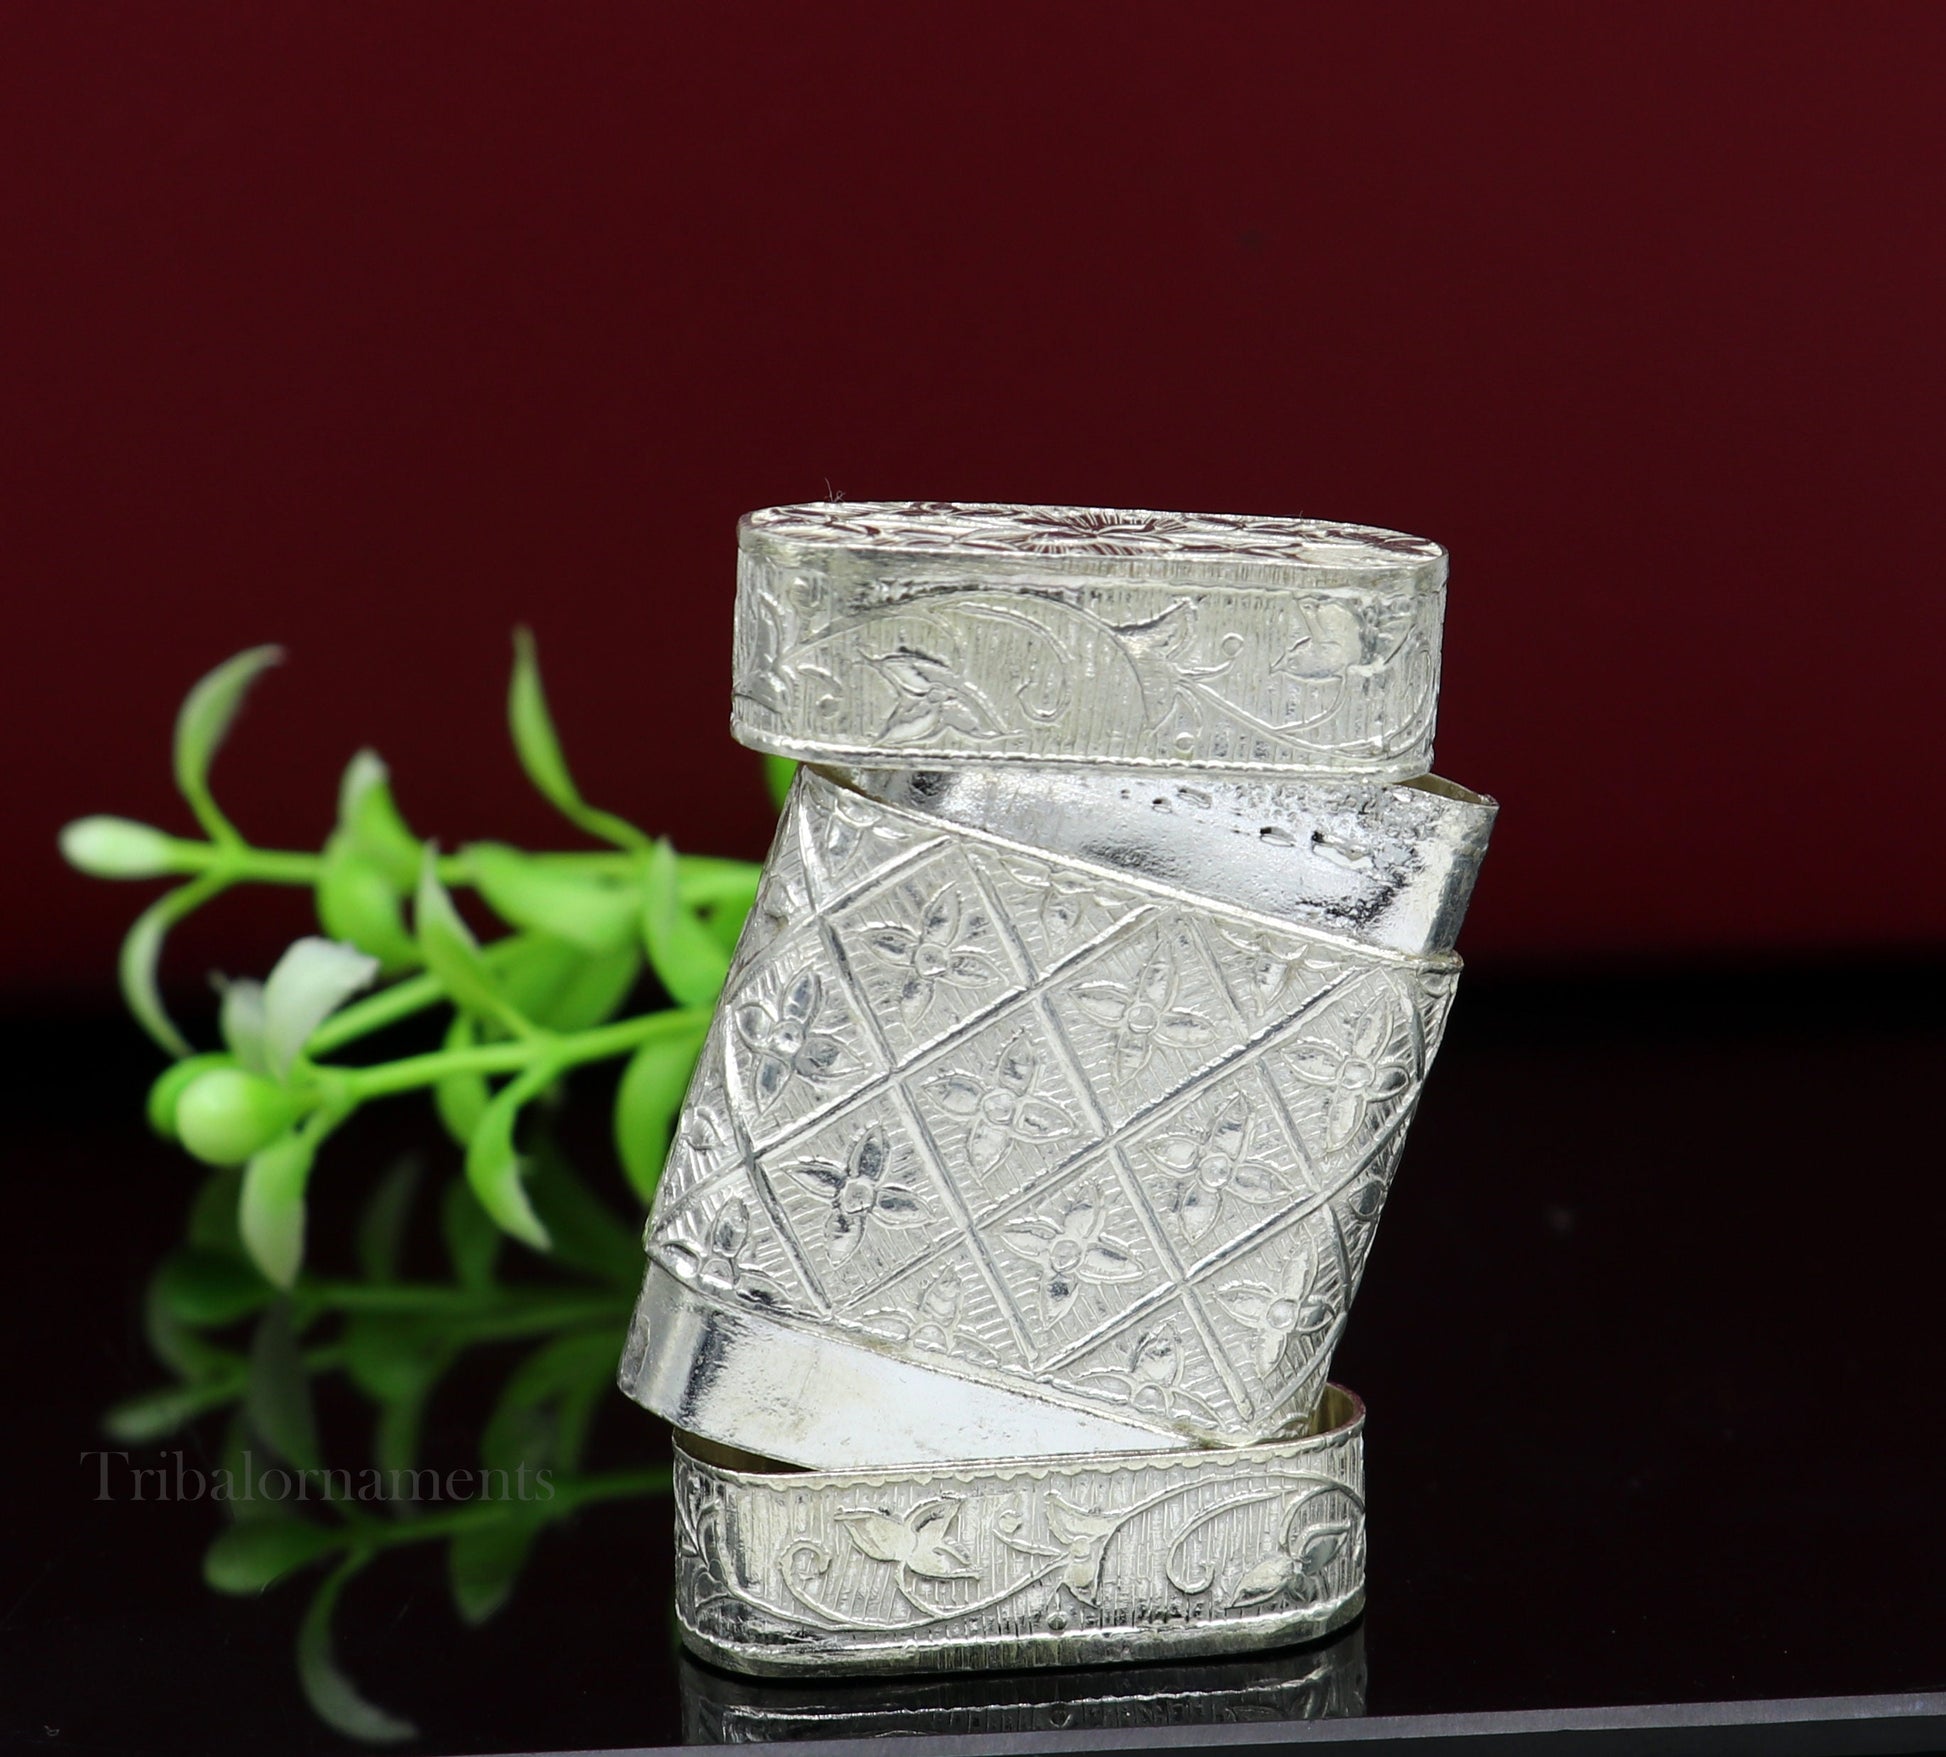 925 sterling silver handcrafted floral design 2 in1 trinket box, tobacco box, tobacco and chuna box, best gifting silver royal article stb97 - TRIBAL ORNAMENTS